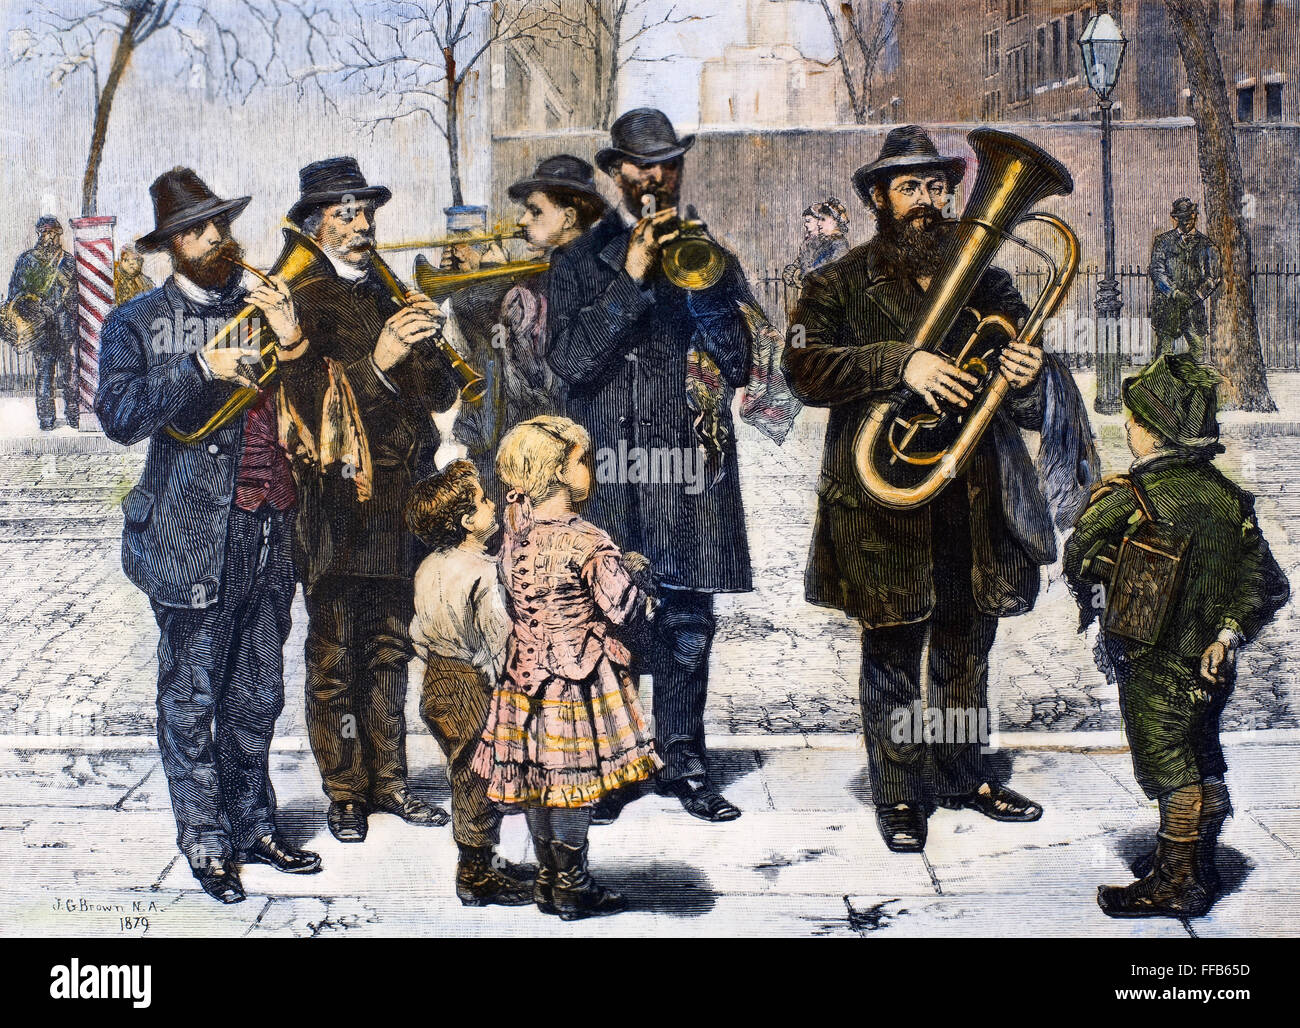 GERMAN STREET BAND, 1879. /nA German street band performing in New York City. Wood engraving, American, 1879, after a painting by John George Brown. Stock Photo